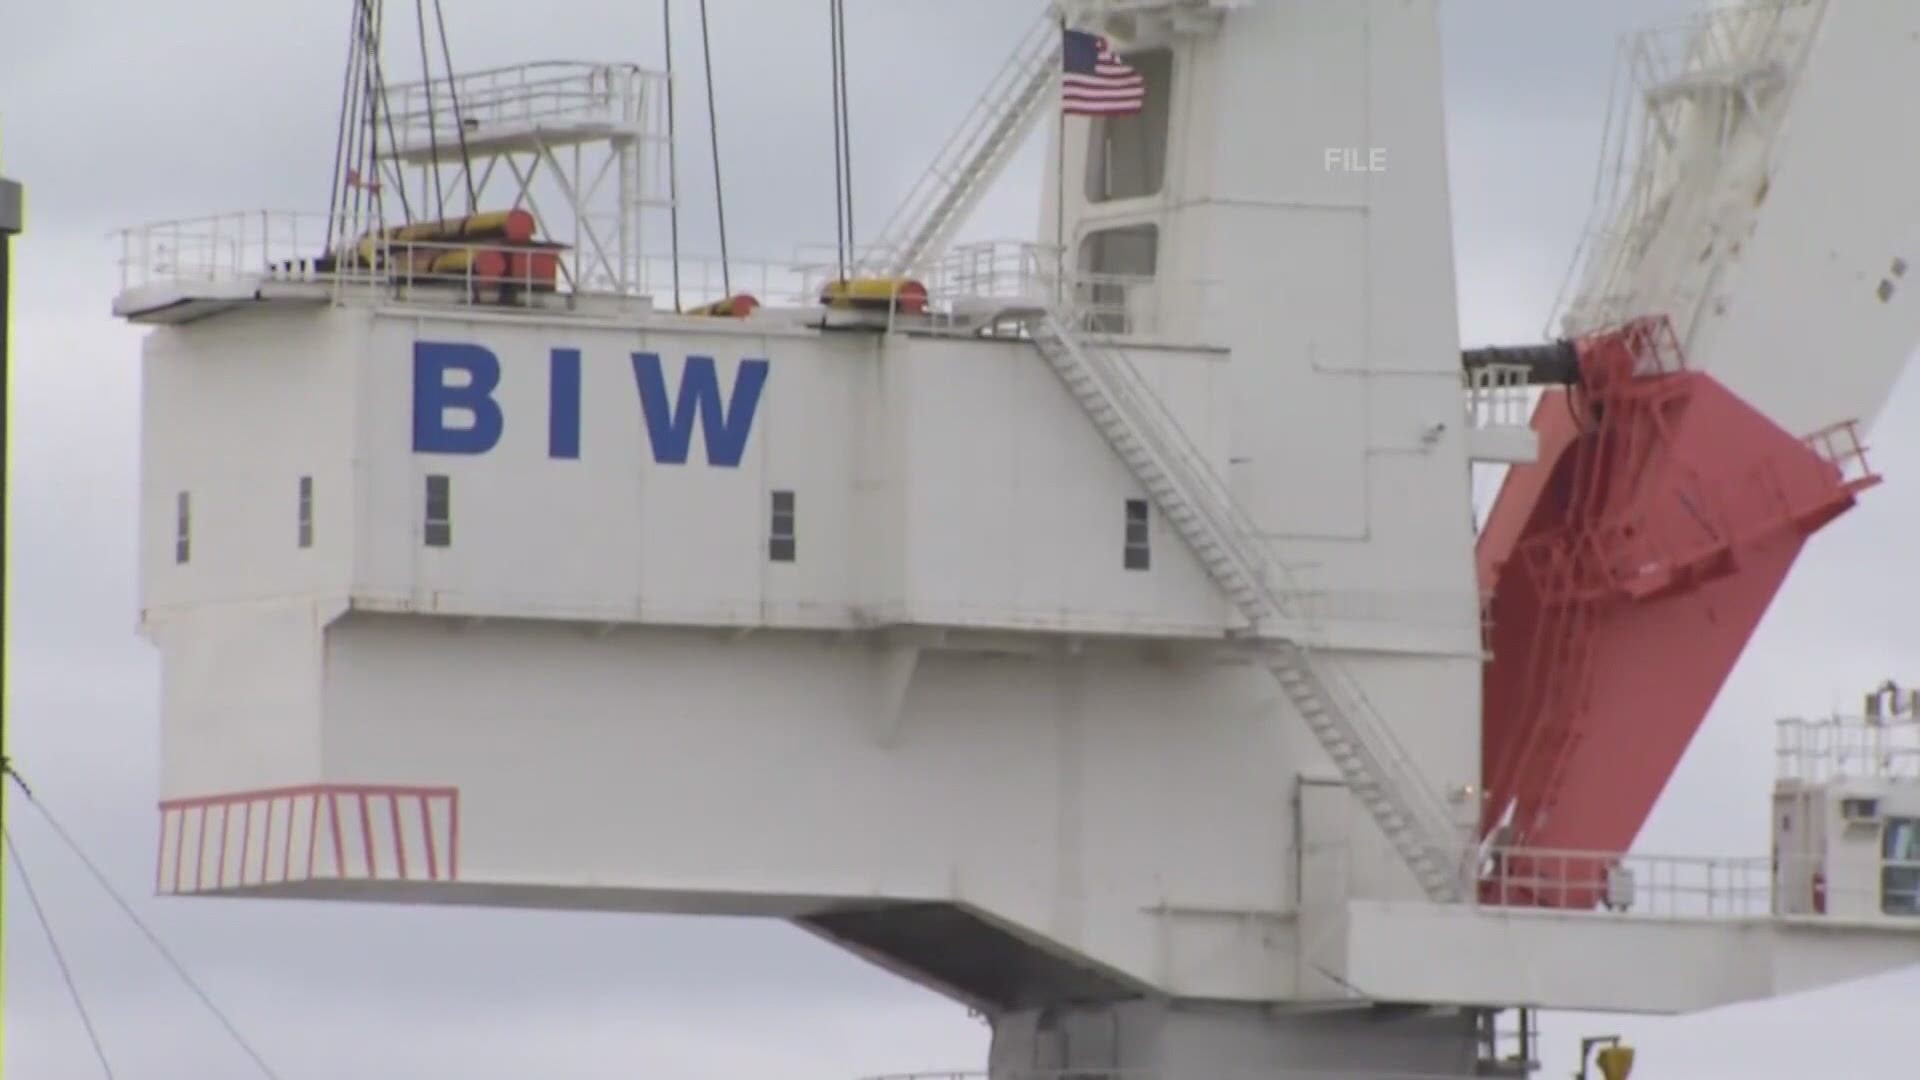 There are 17 active cases associated with bath iron works and a total of 19 employees have tested positive in just the last 2 weeks